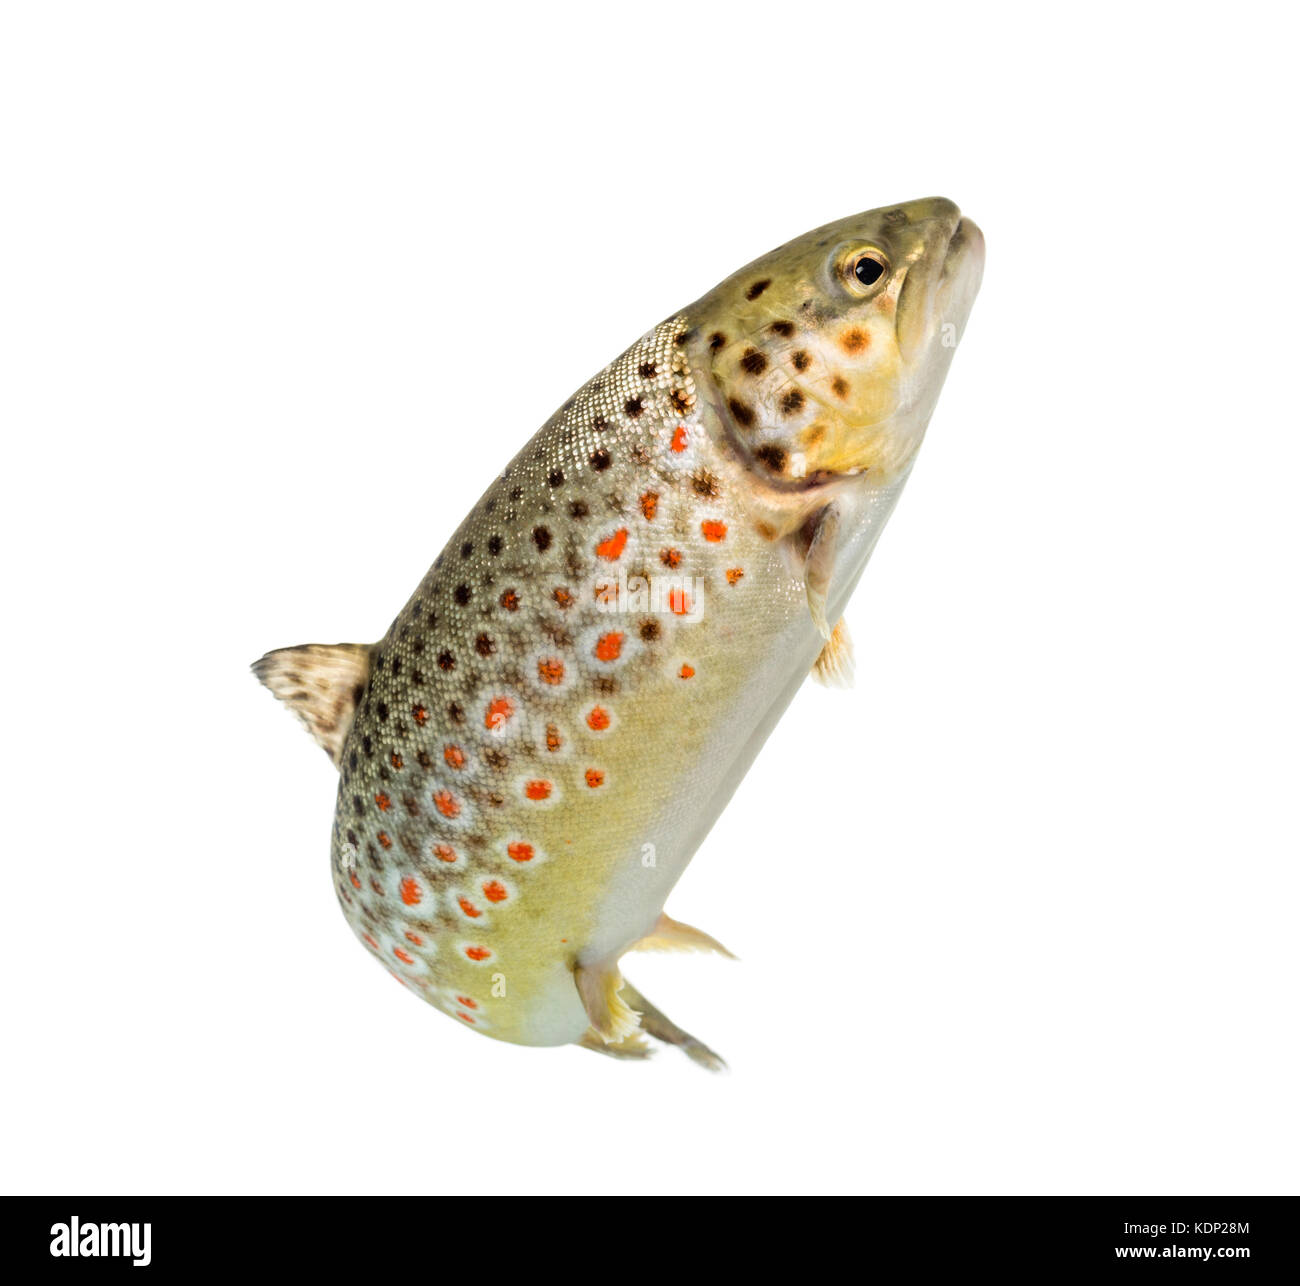 Alert Geometri miles Red spotted trout Cut Out Stock Images & Pictures - Alamy